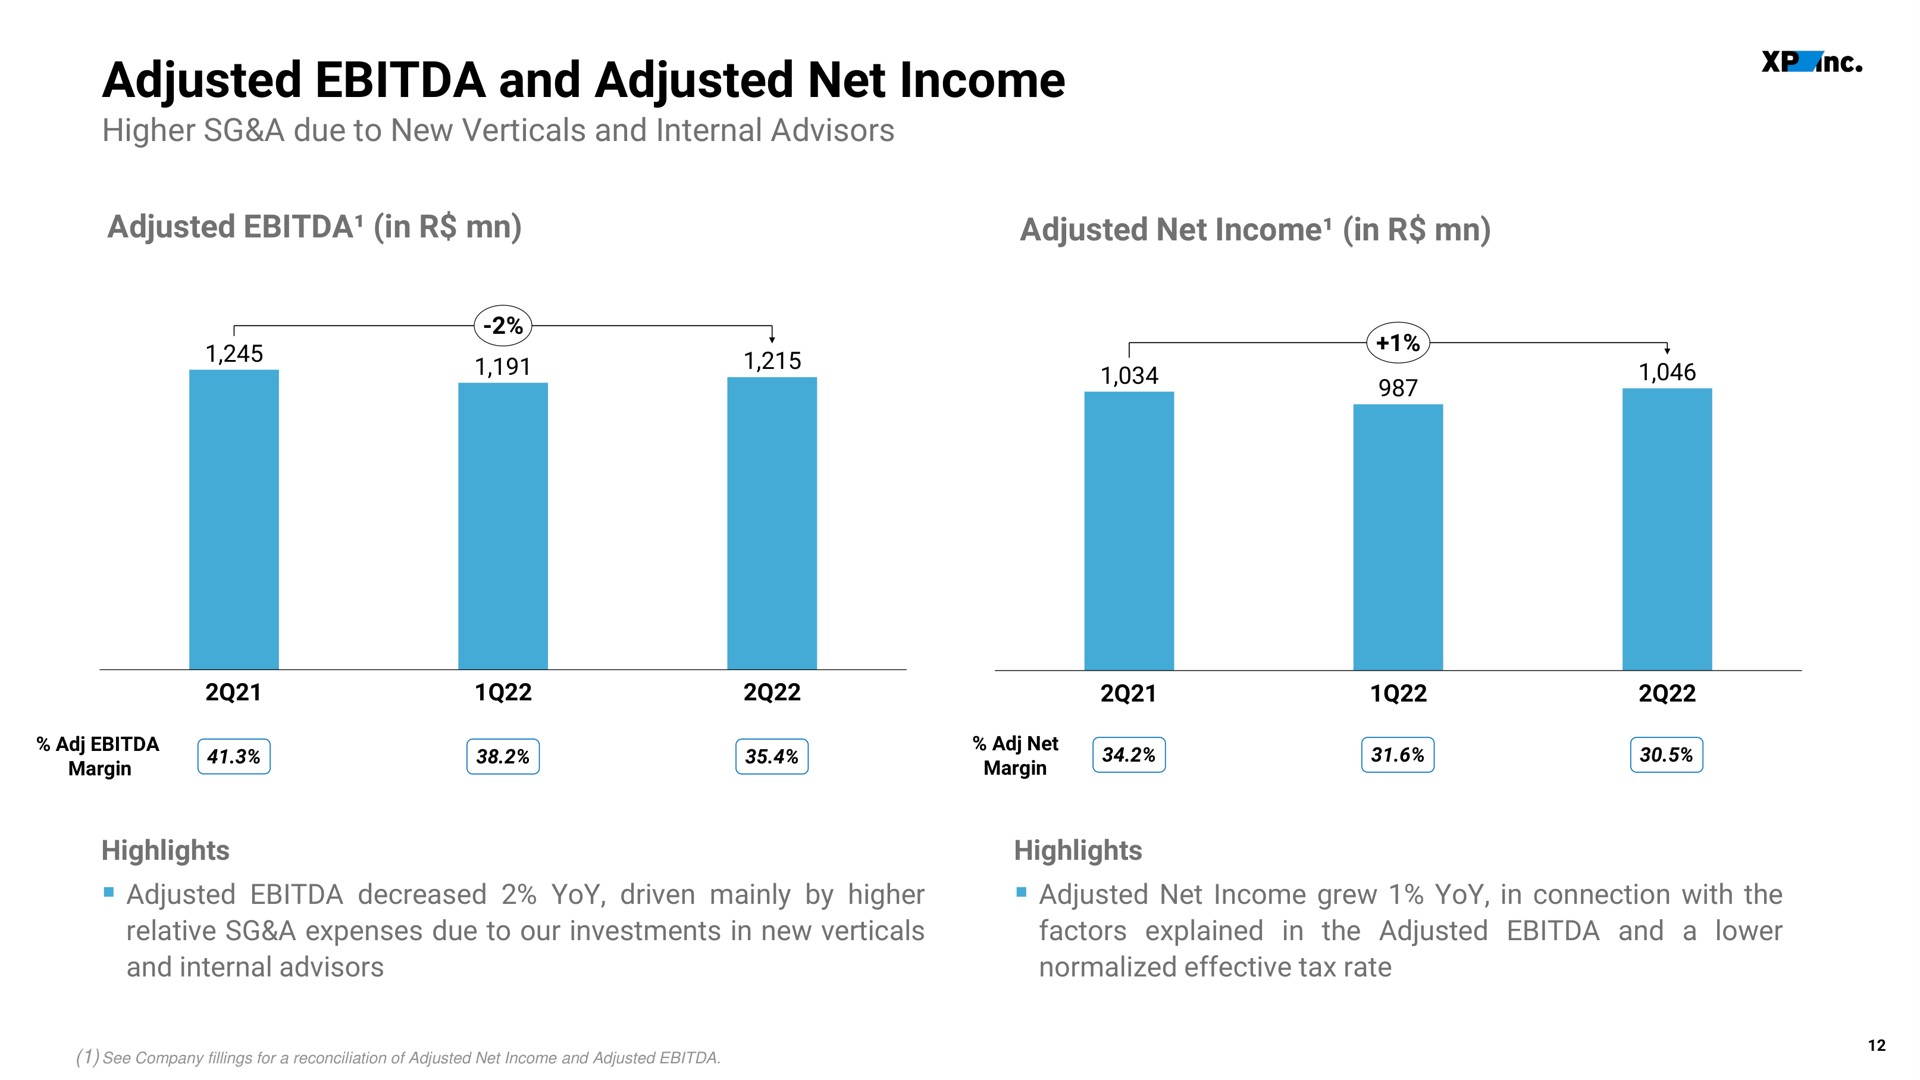 adjusted and adjusted net income | XP Inc